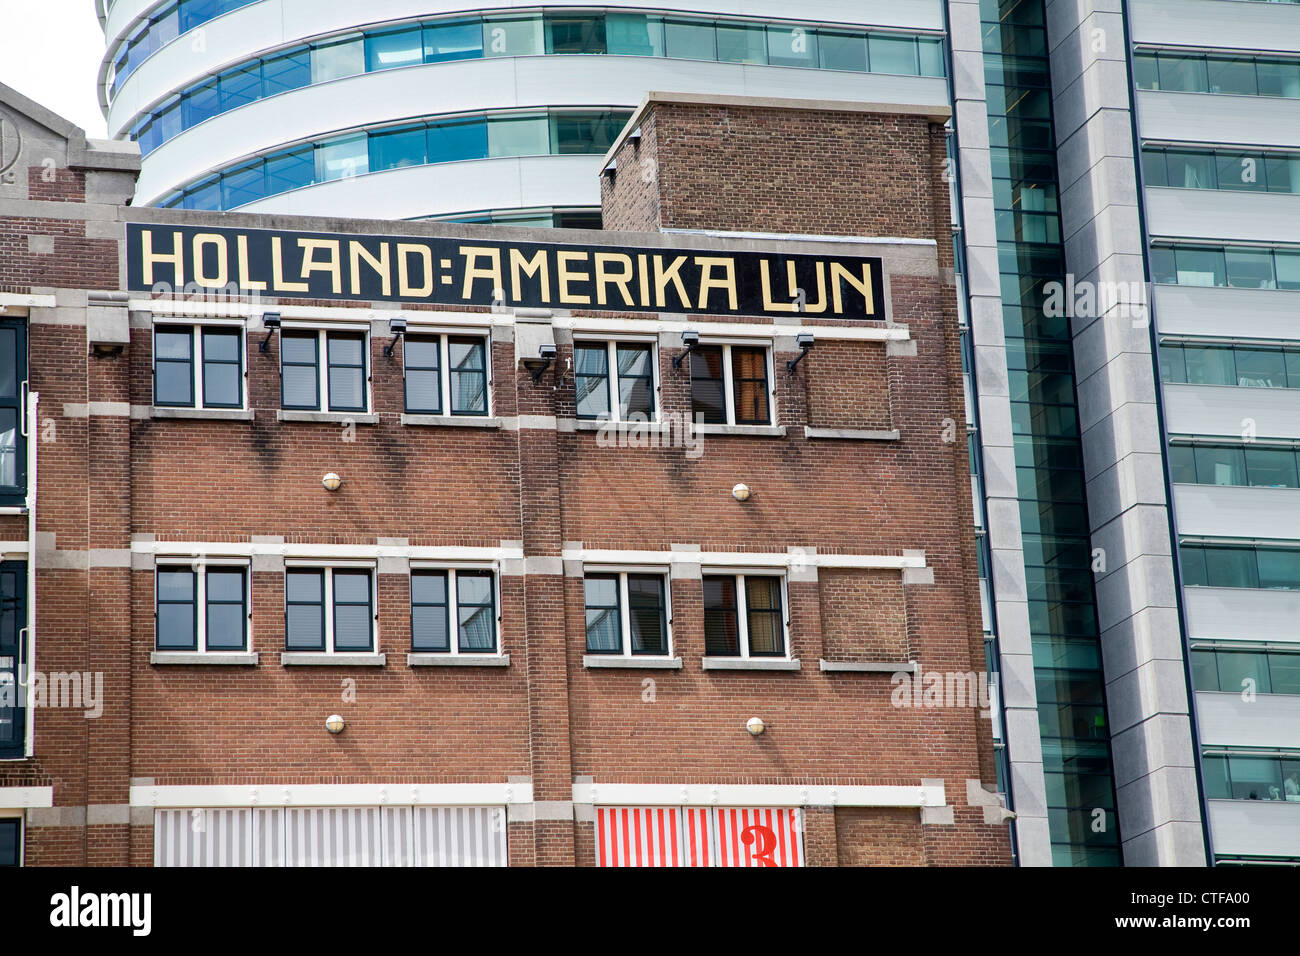 Hotel New York, Holland Amerika Line, Rotterdam, Pays-Bas Banque D'Images